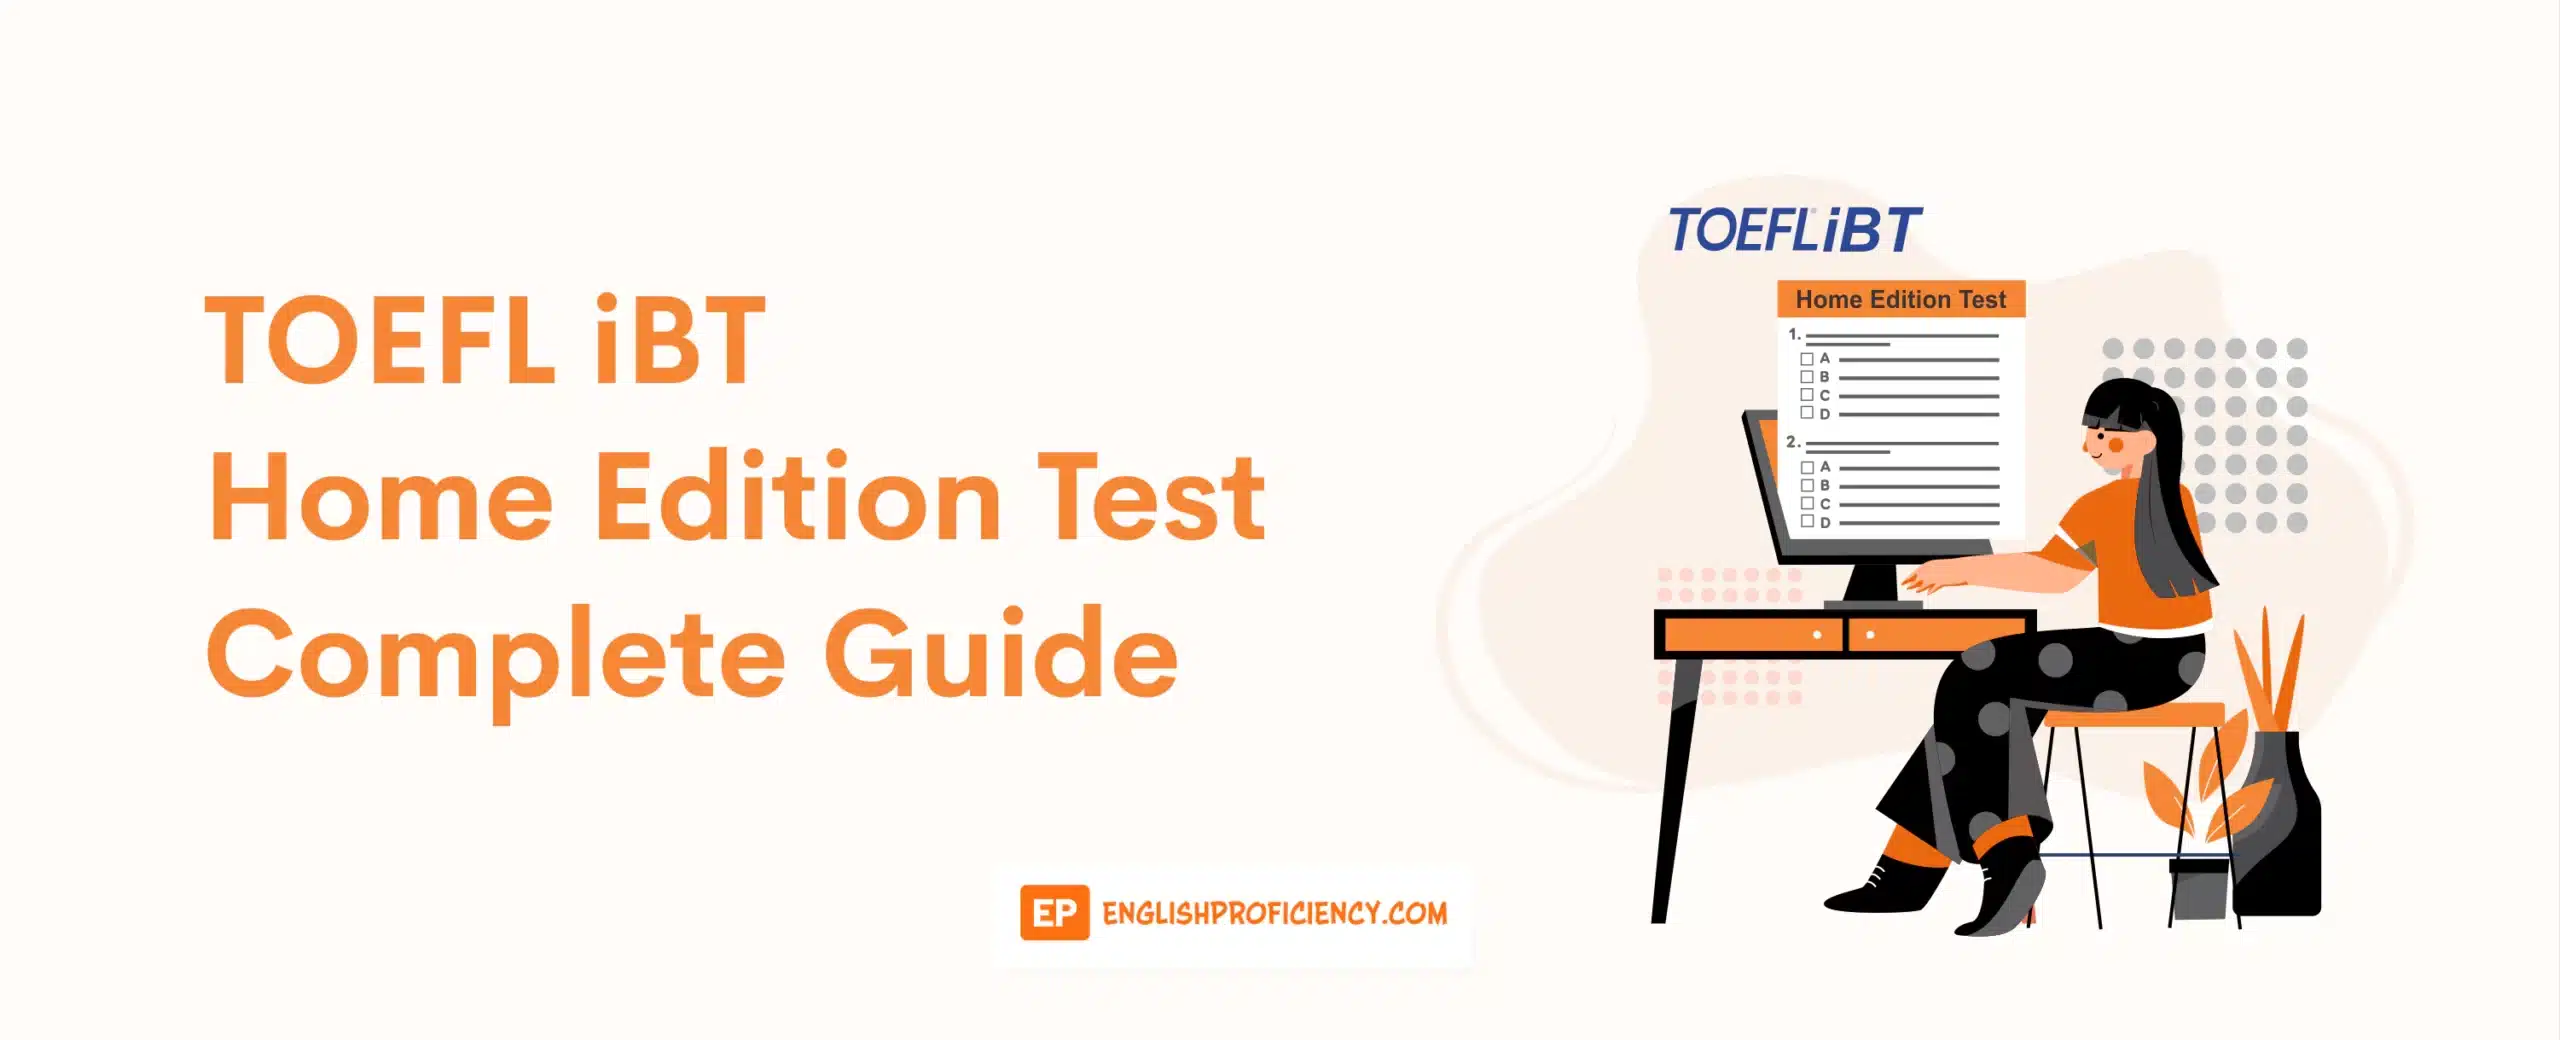 TOEFL iBT Home Edition Test Complete Guide